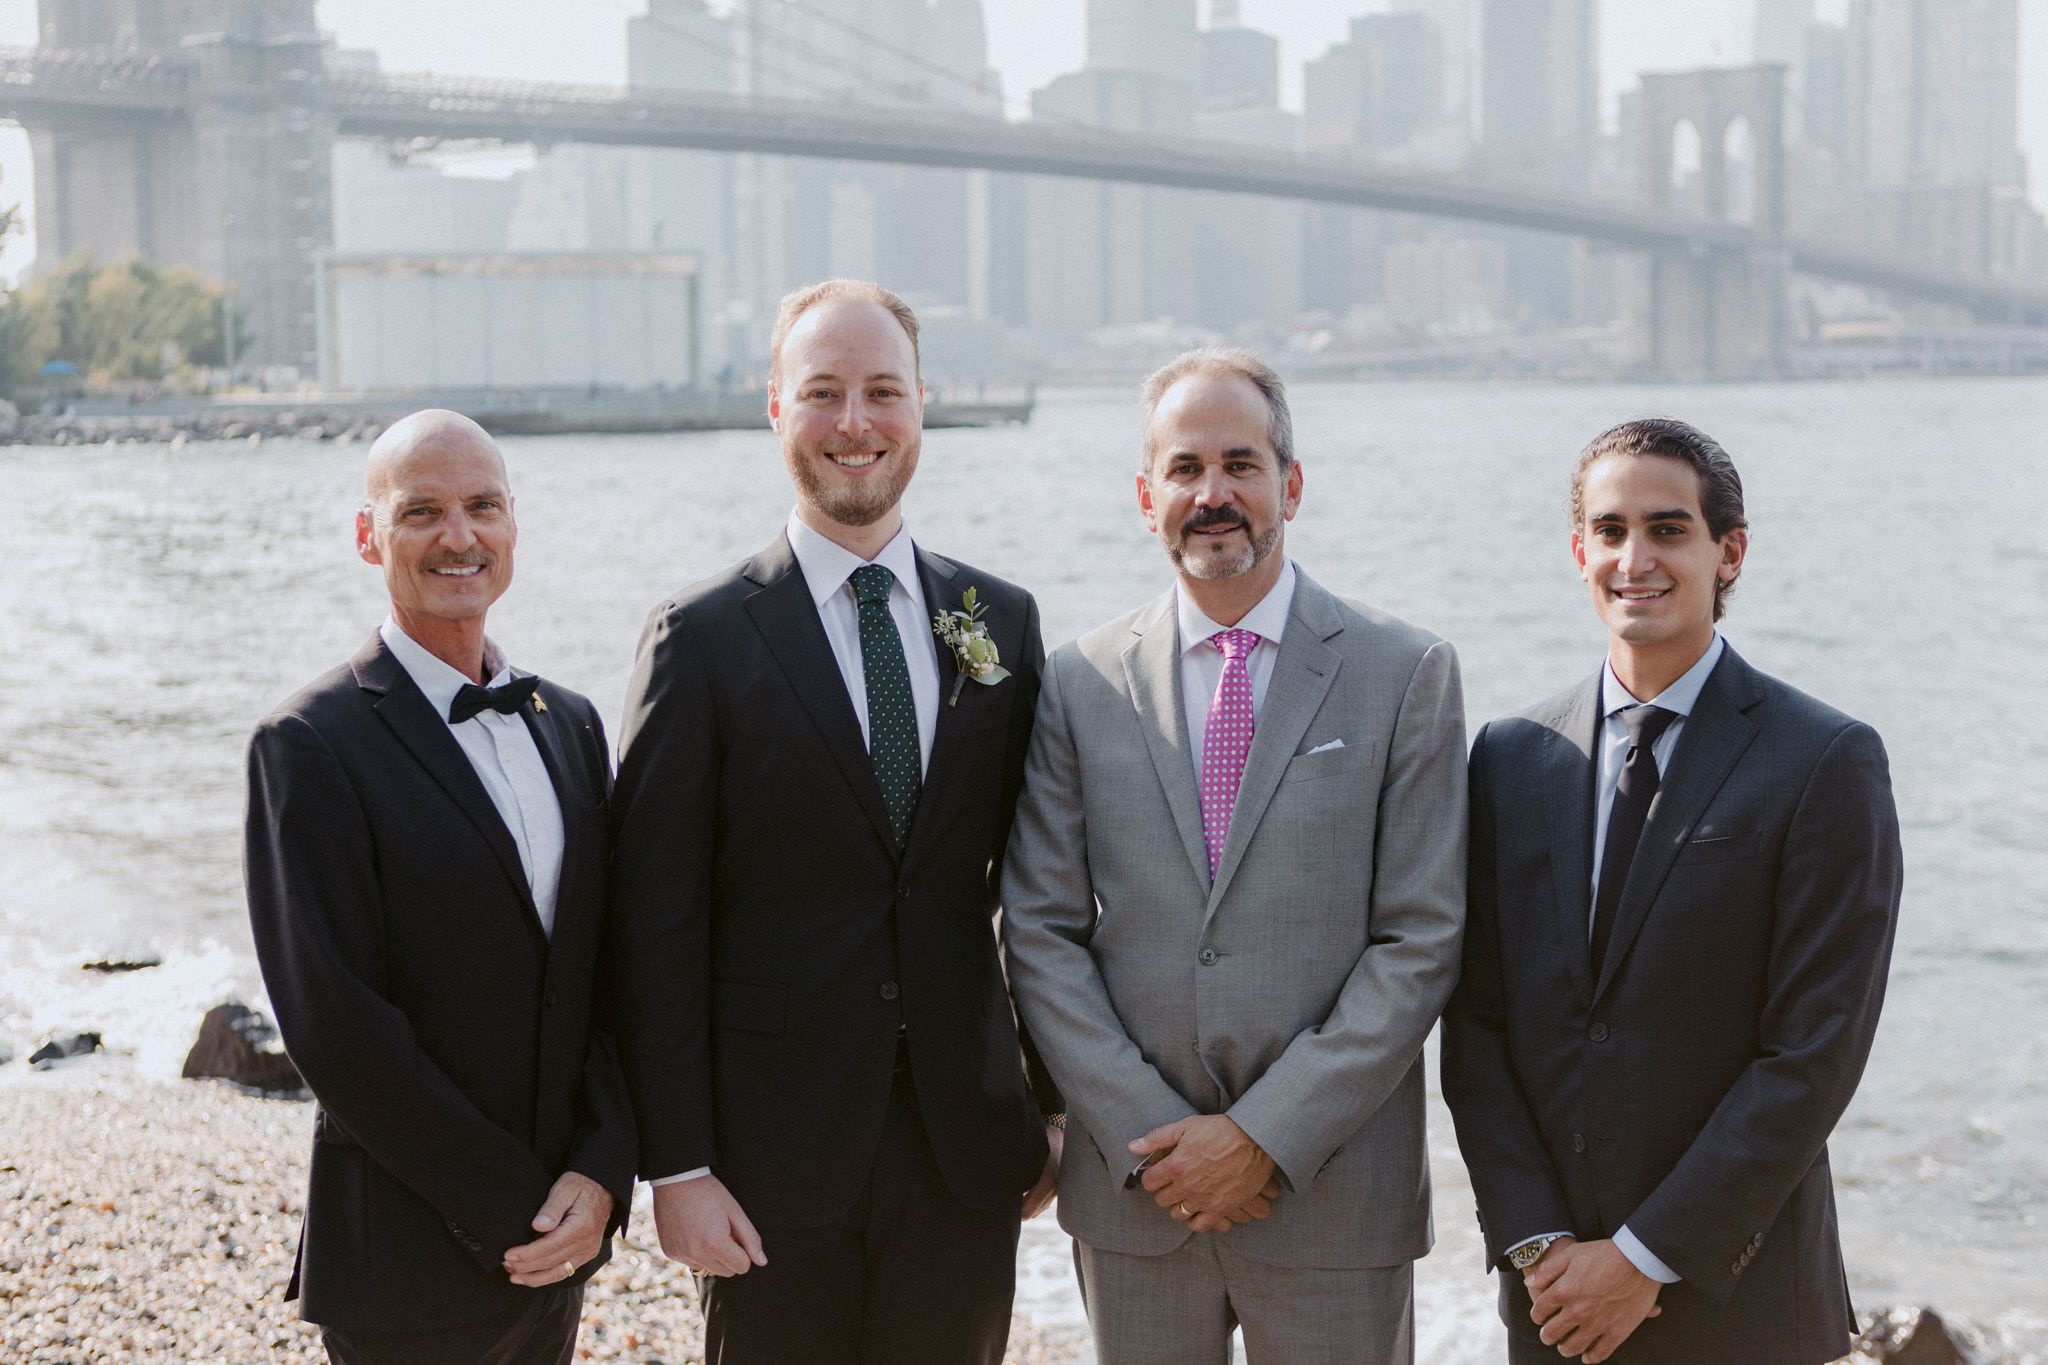 The groom is standing beside his father and groomsmen in NYC.
